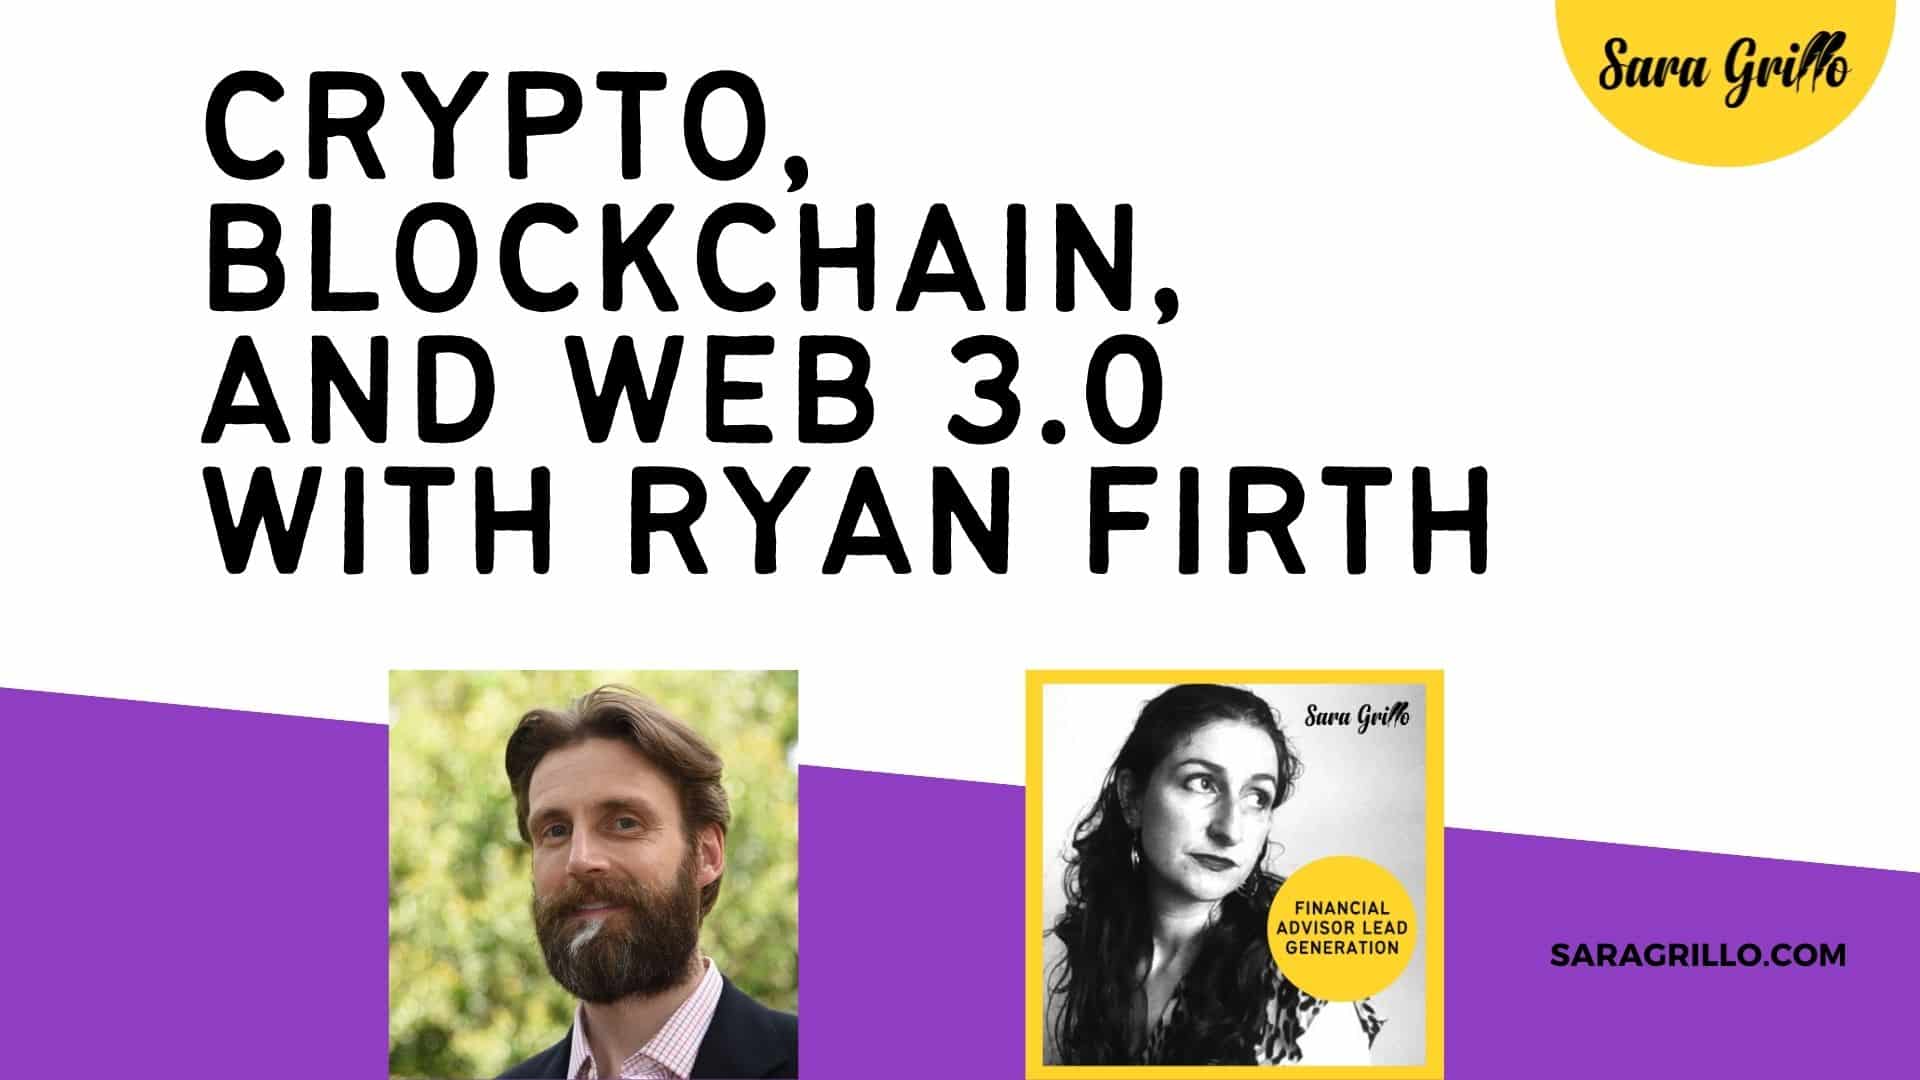 In this interview with crypto financial advisor Ryan Firth, we discuss blockchain, crypto, and web 3.0.